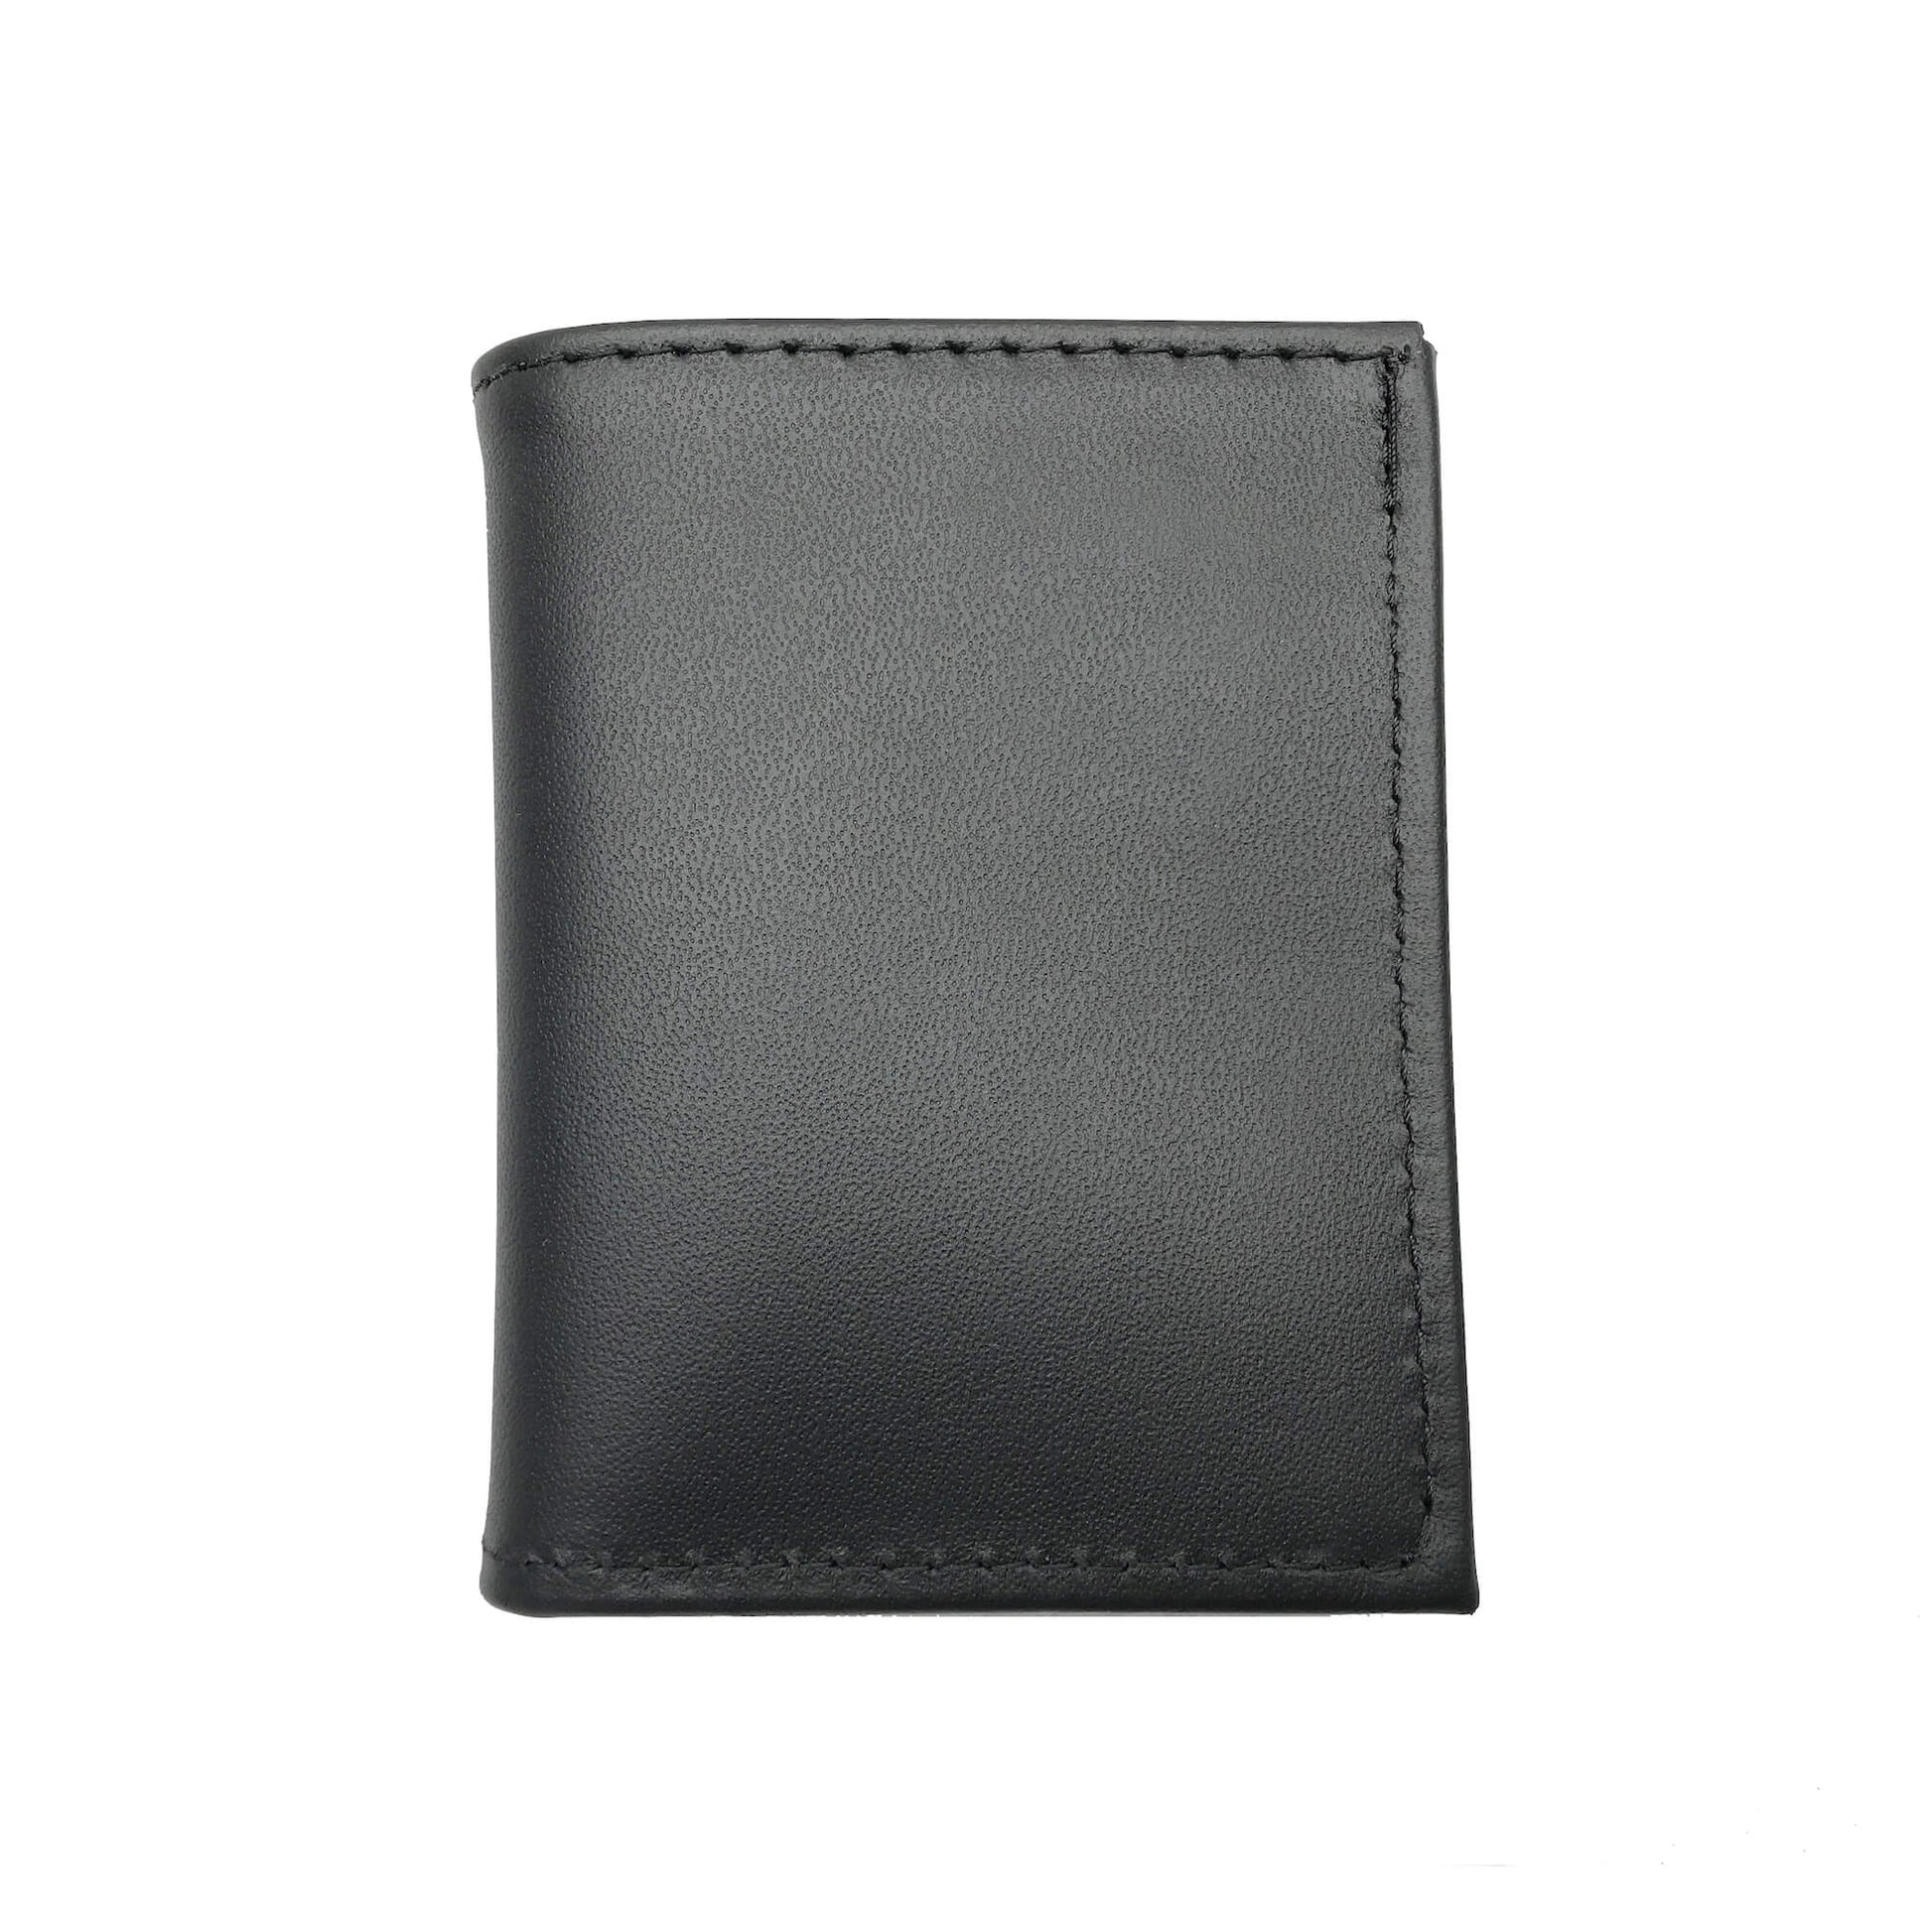 New York Police Department (NYPD) Detective Bifold Hidden Badge Wallet-Perfect Fit-911 Duty Gear USA